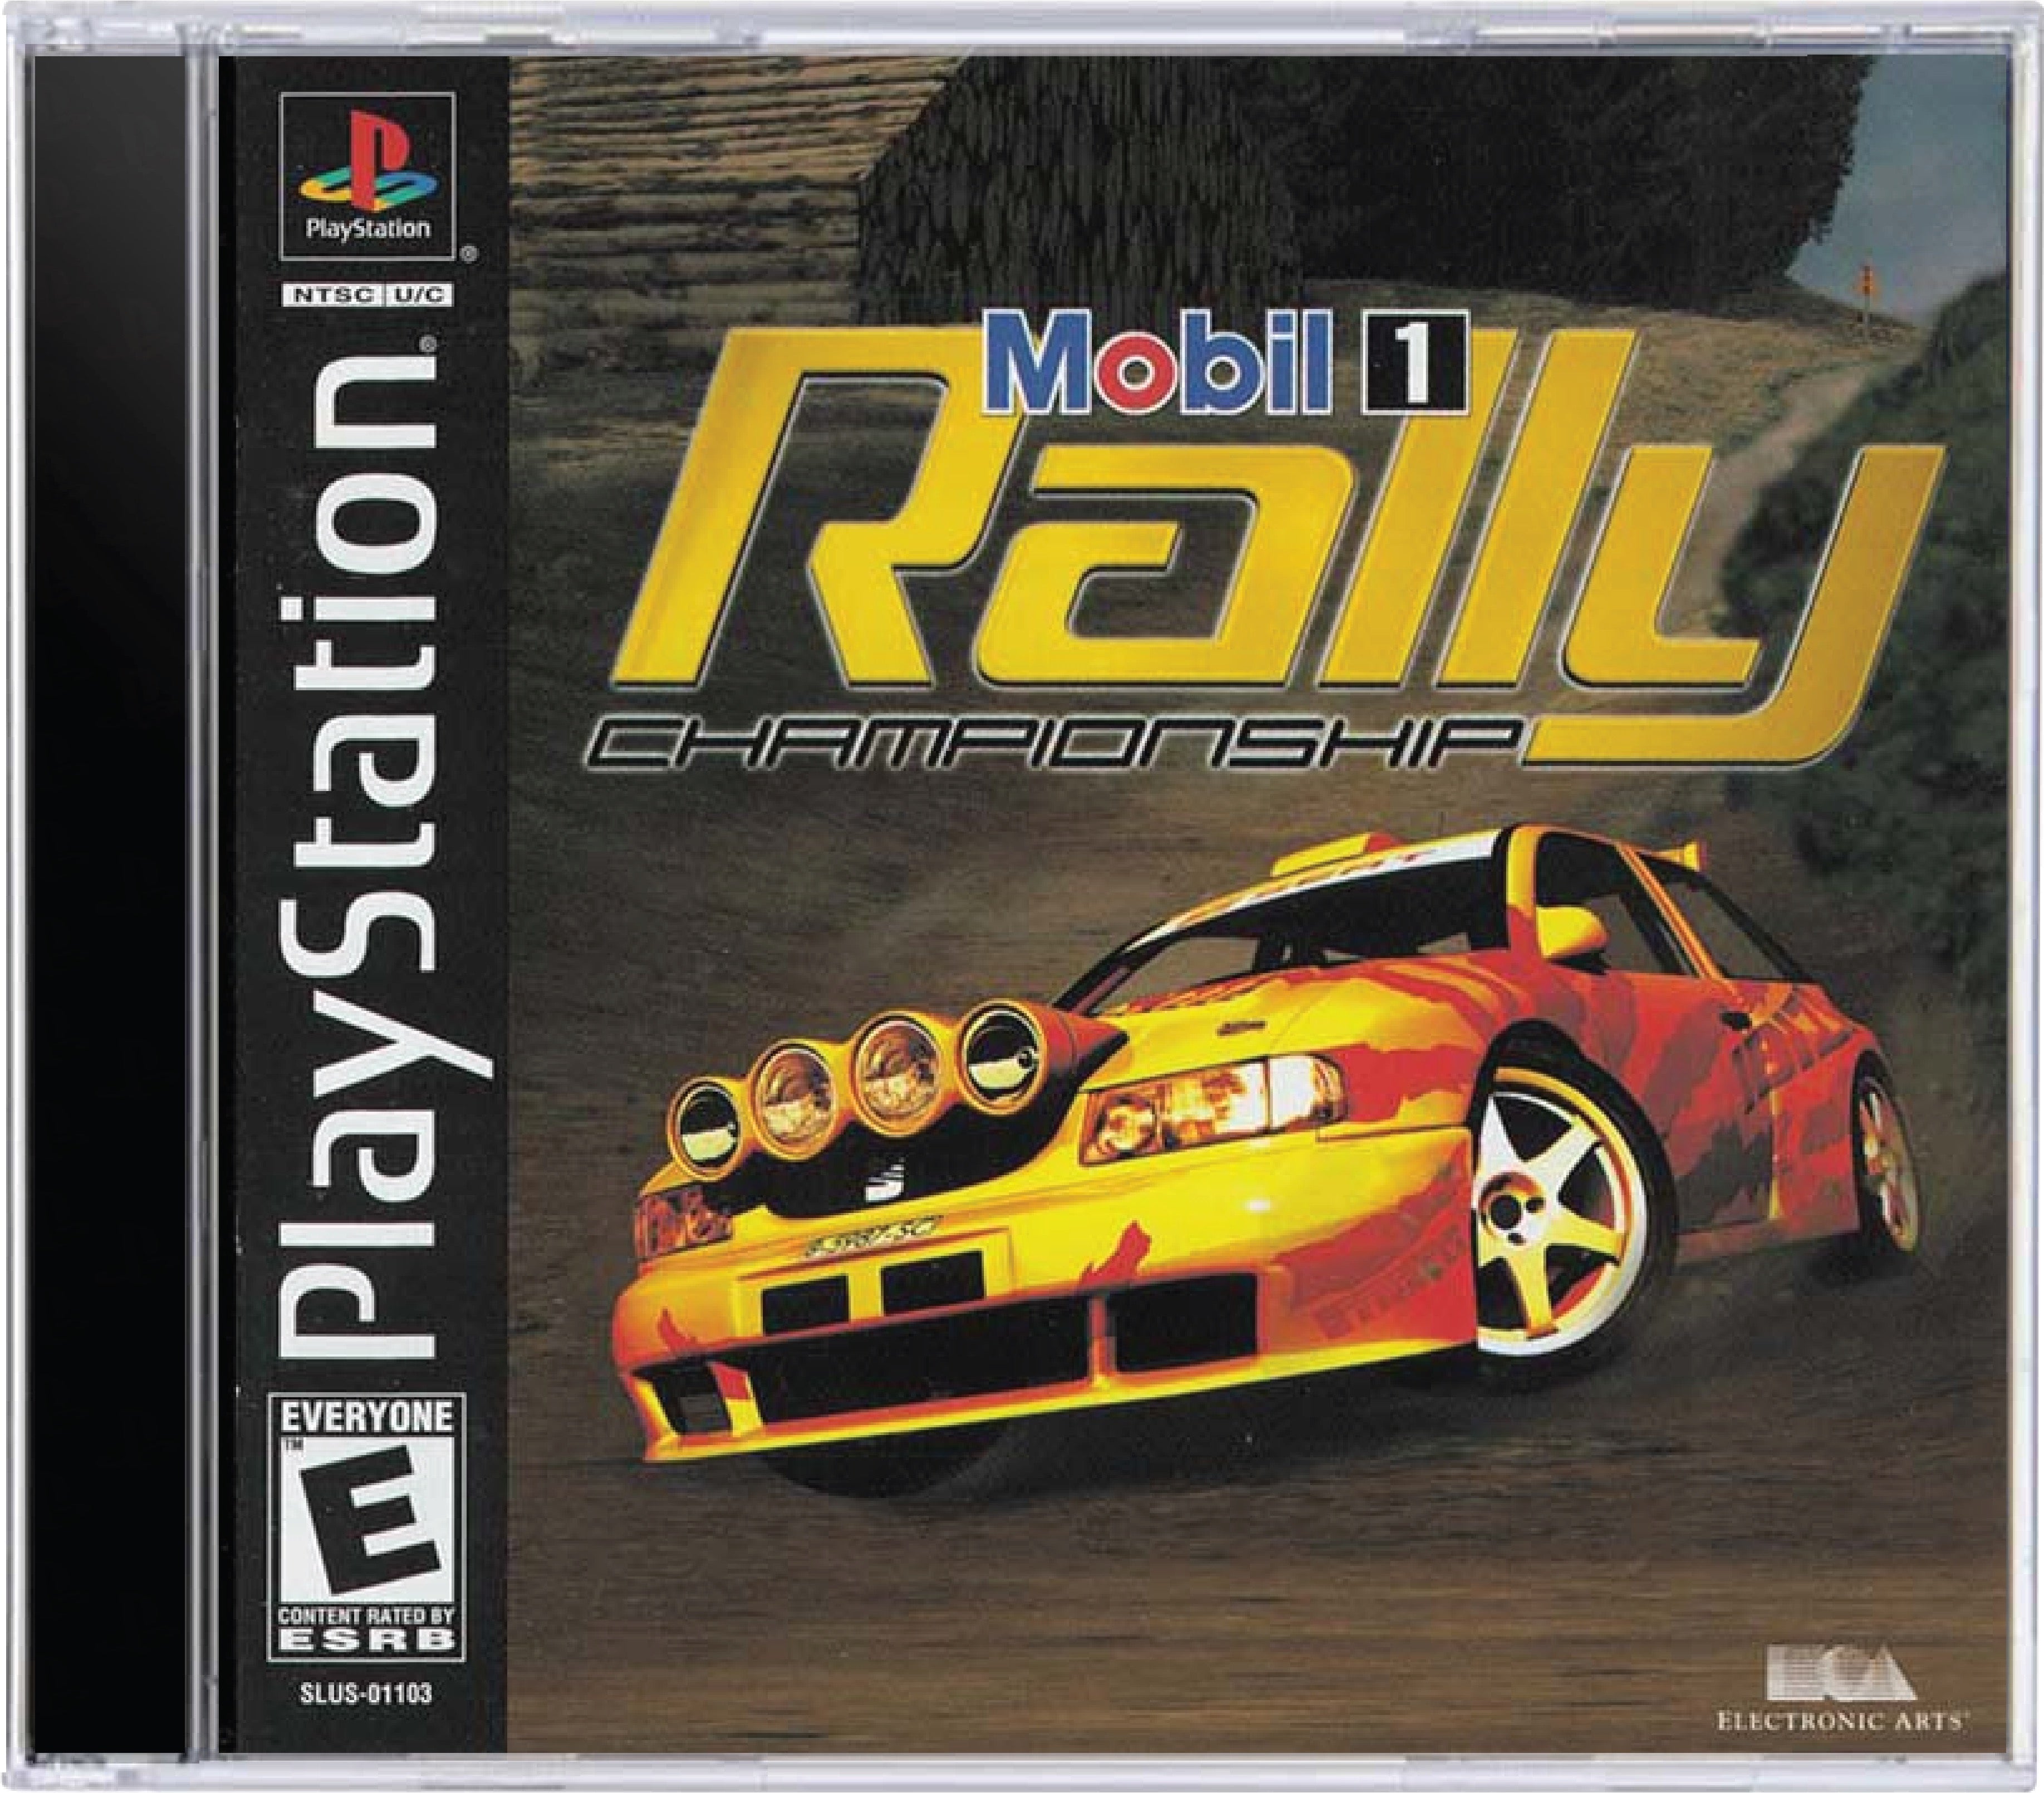 Mobil 1 Rally Championship Cover Art and Product Photo